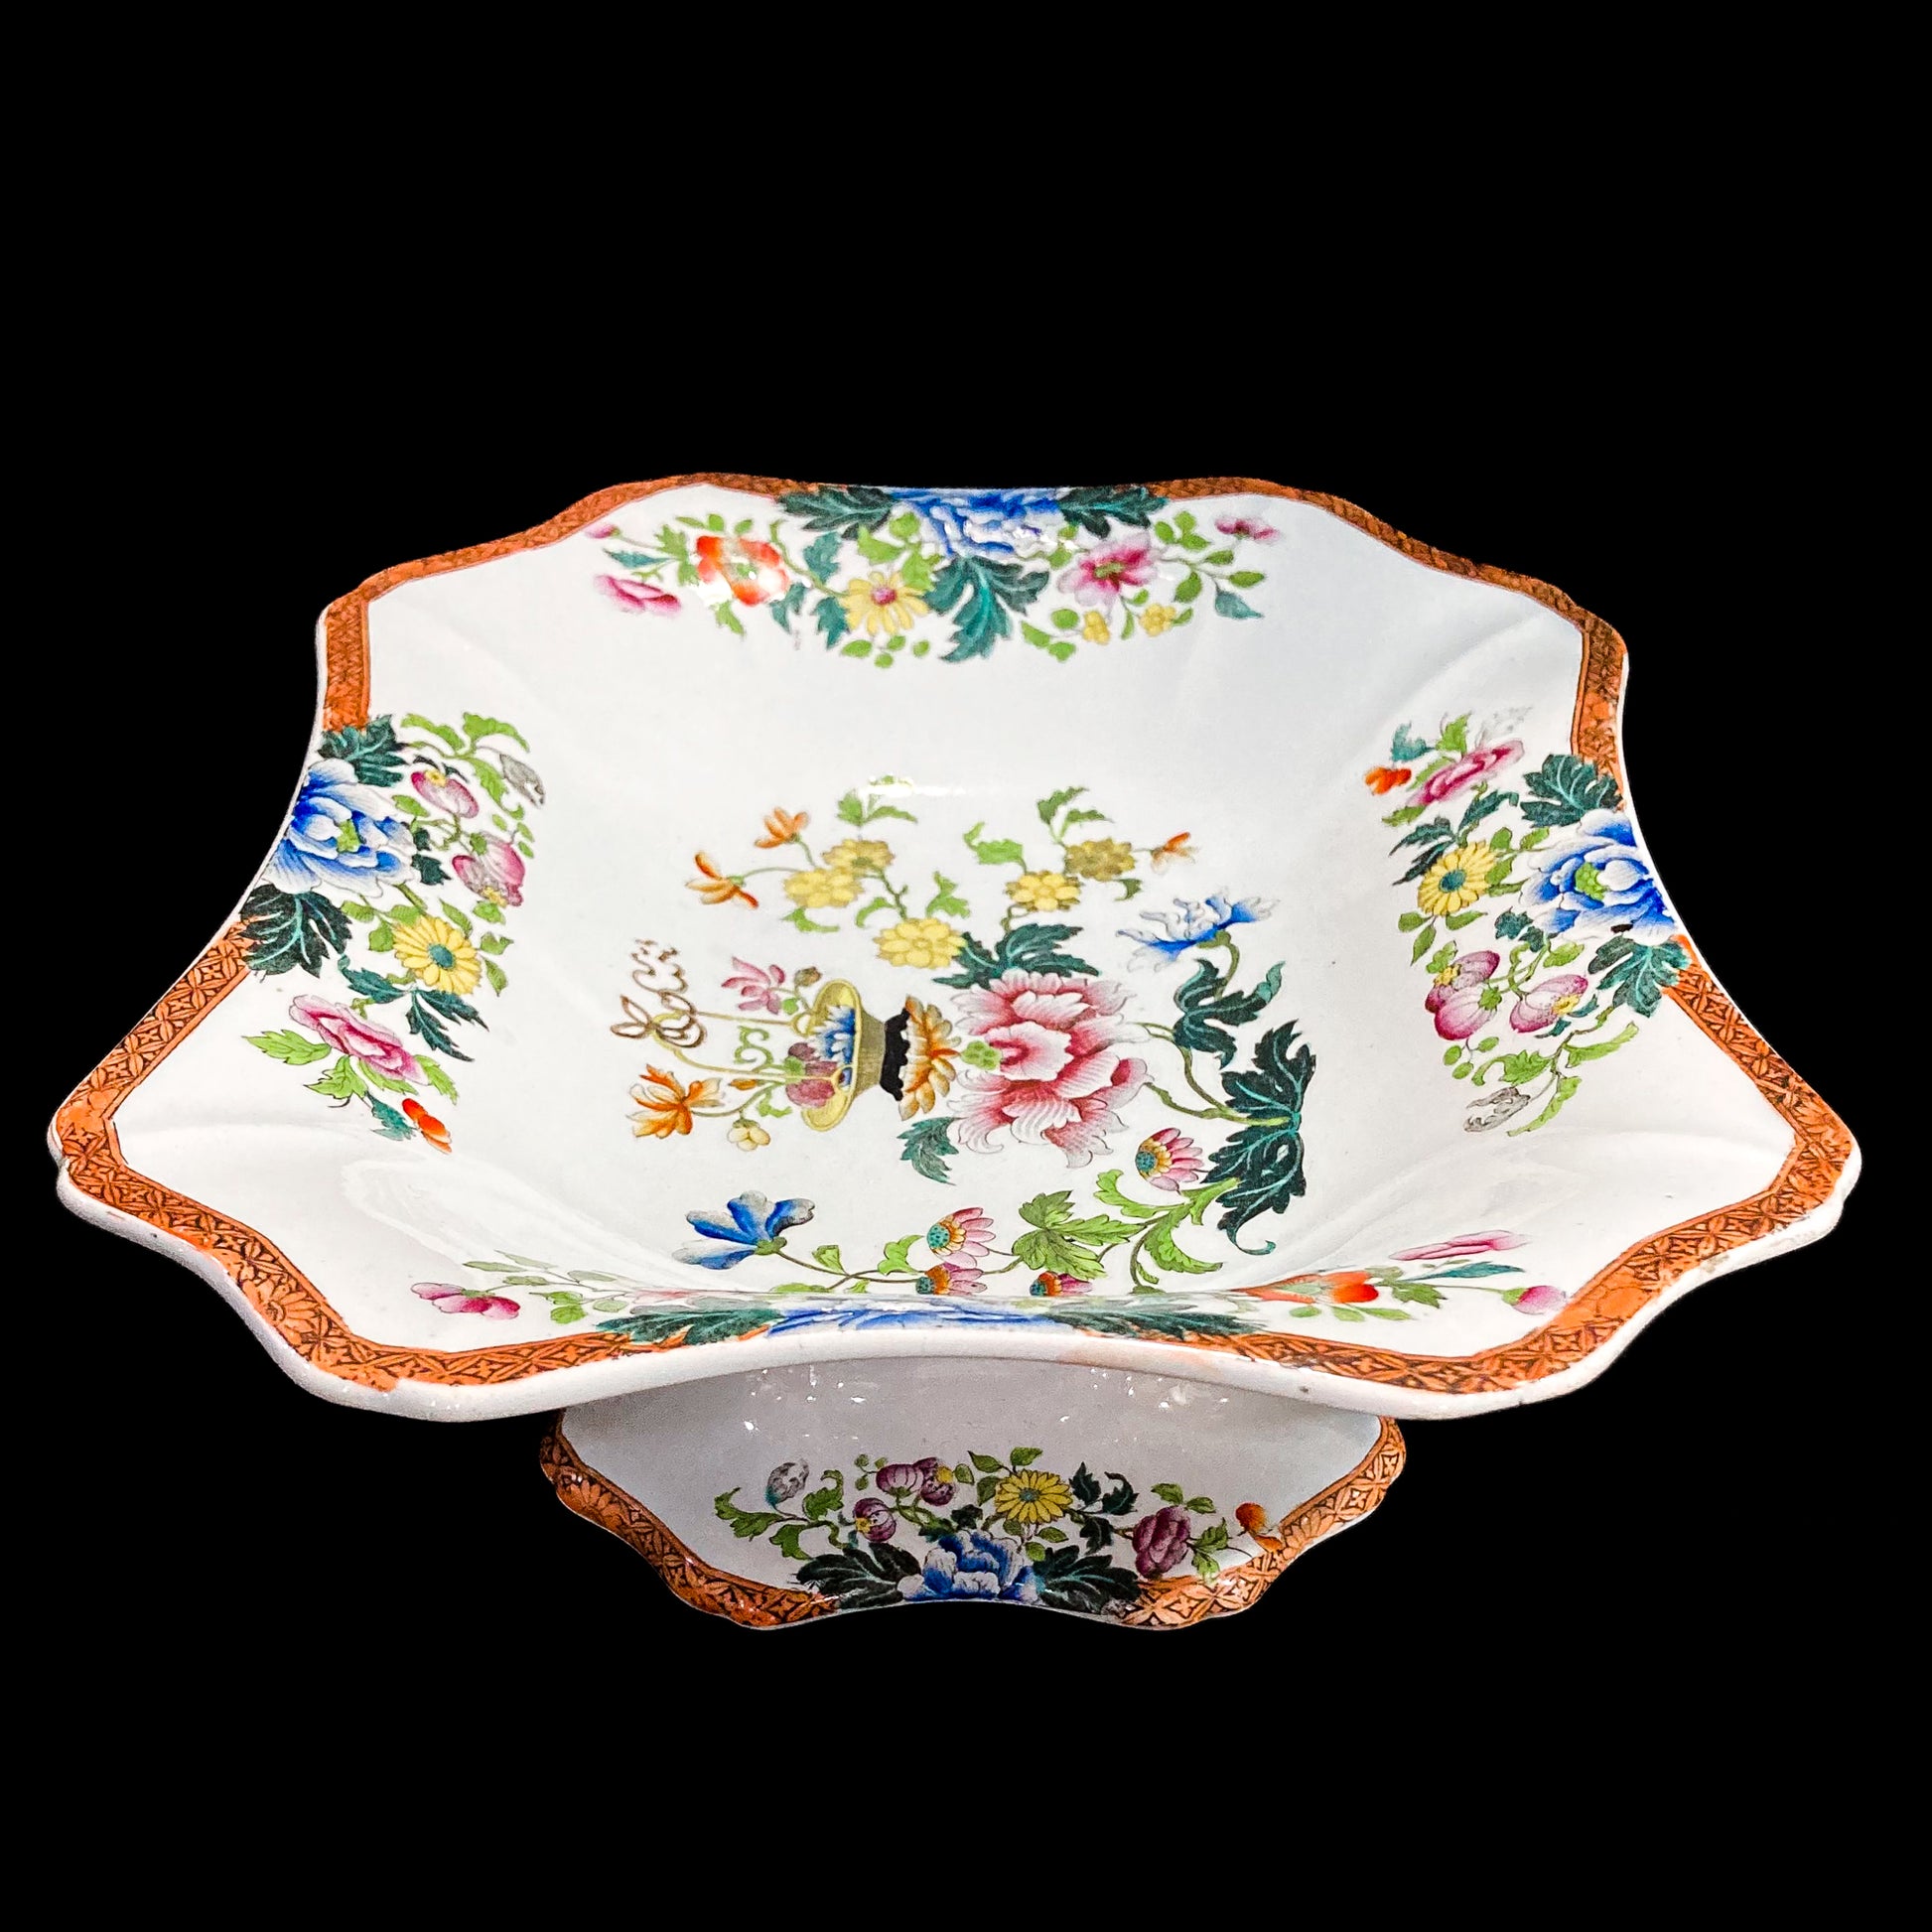 Antique 1850s Wedgwood Enameled Multicolor Floral Footed Compote Dish 6